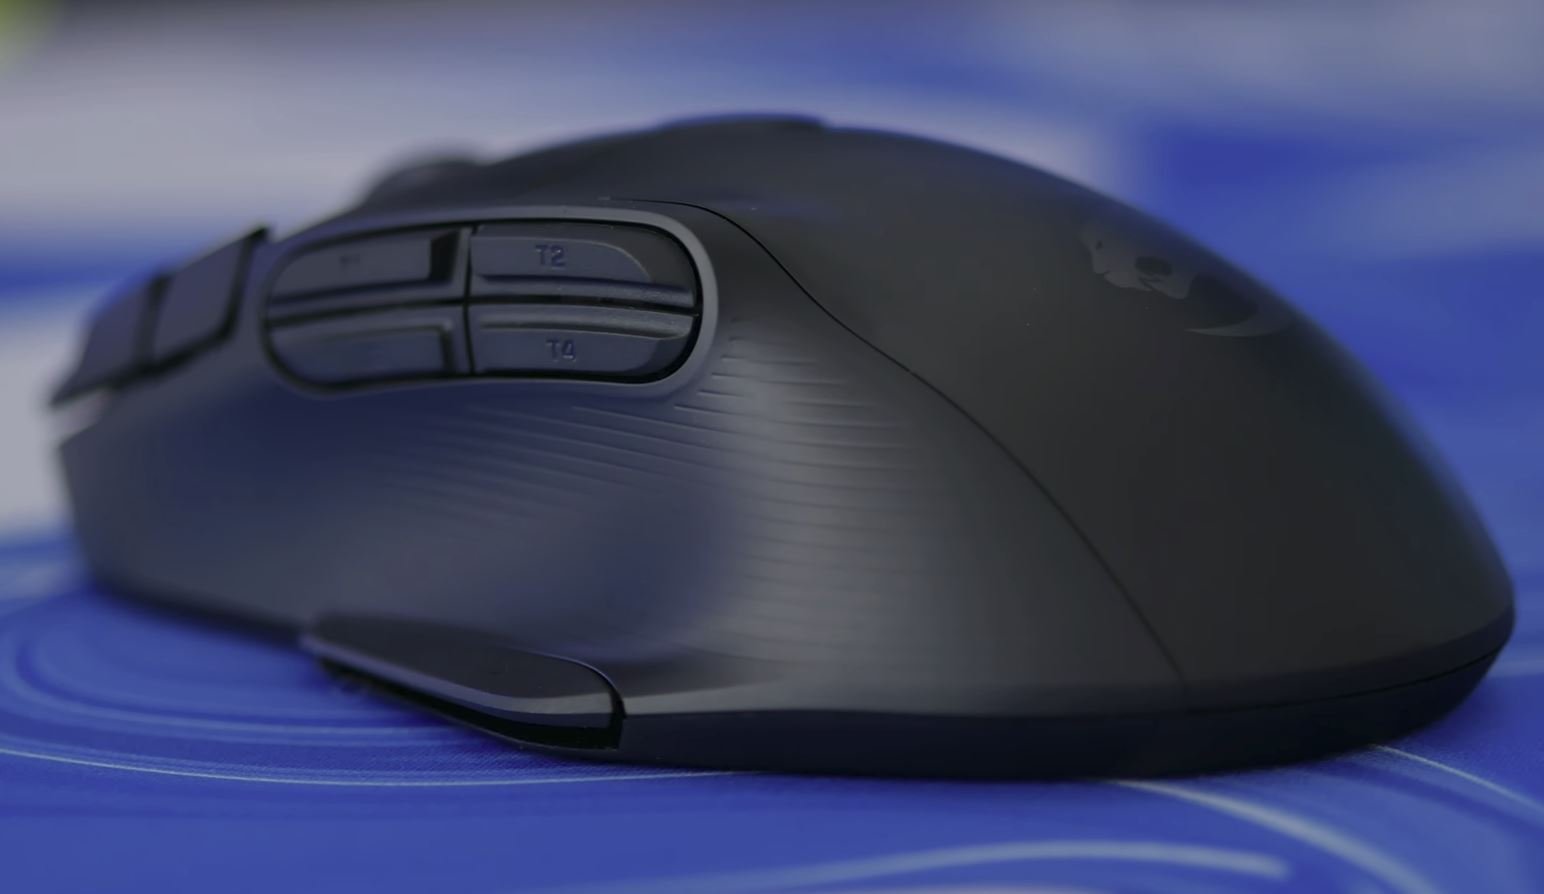 ROCCAT Kone XP Air Wireless Ergonomic Gaming Mouse Review